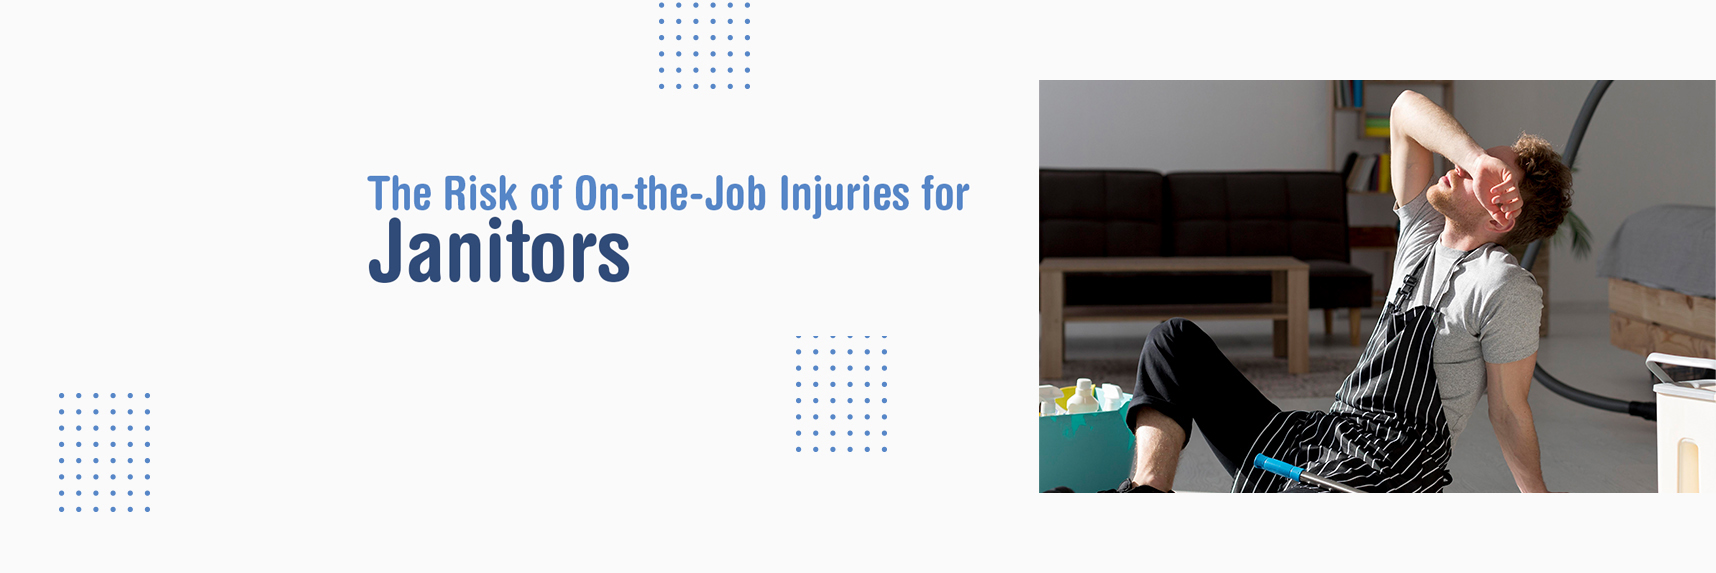 The Risk of On-the-Job Injuries for Janitors